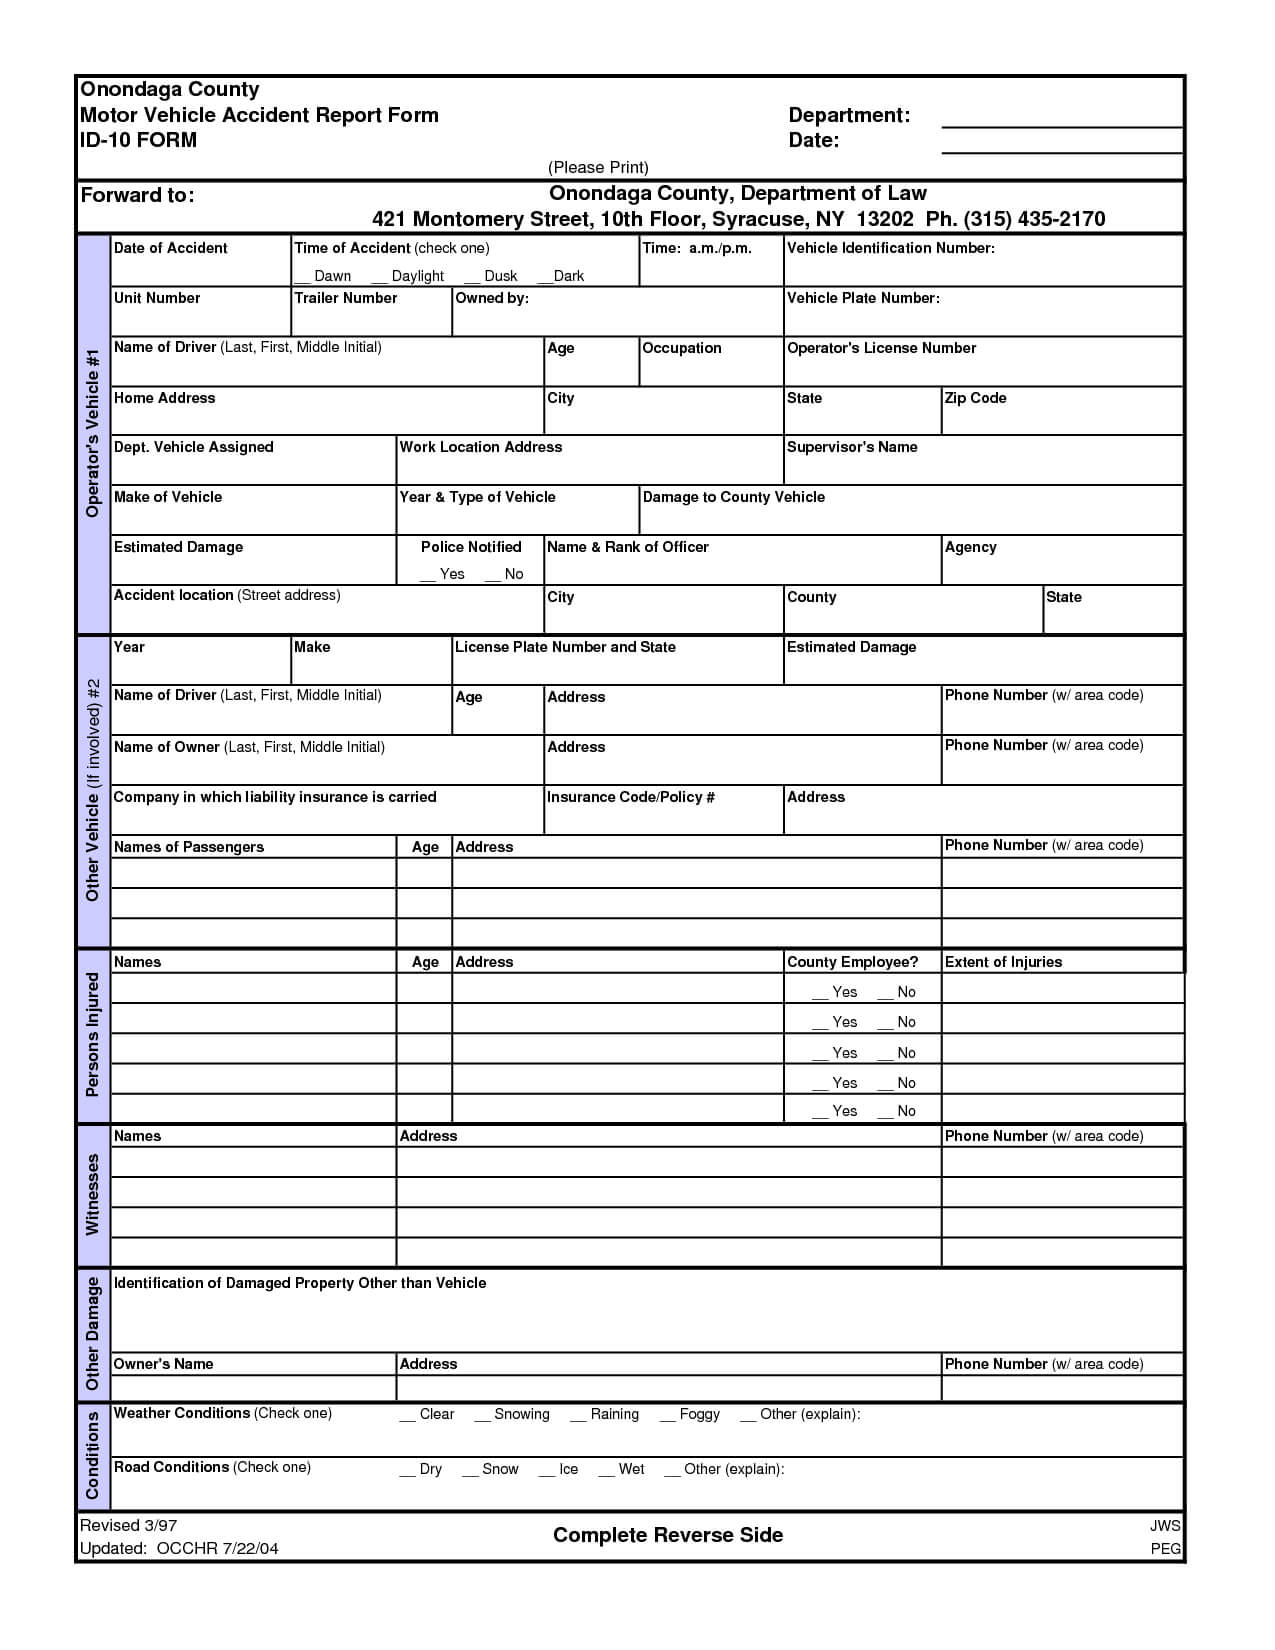 003 Auto Accident Report Form Template Ideas Motor Vehicle Throughout Motor Vehicle Accident Report Form Template